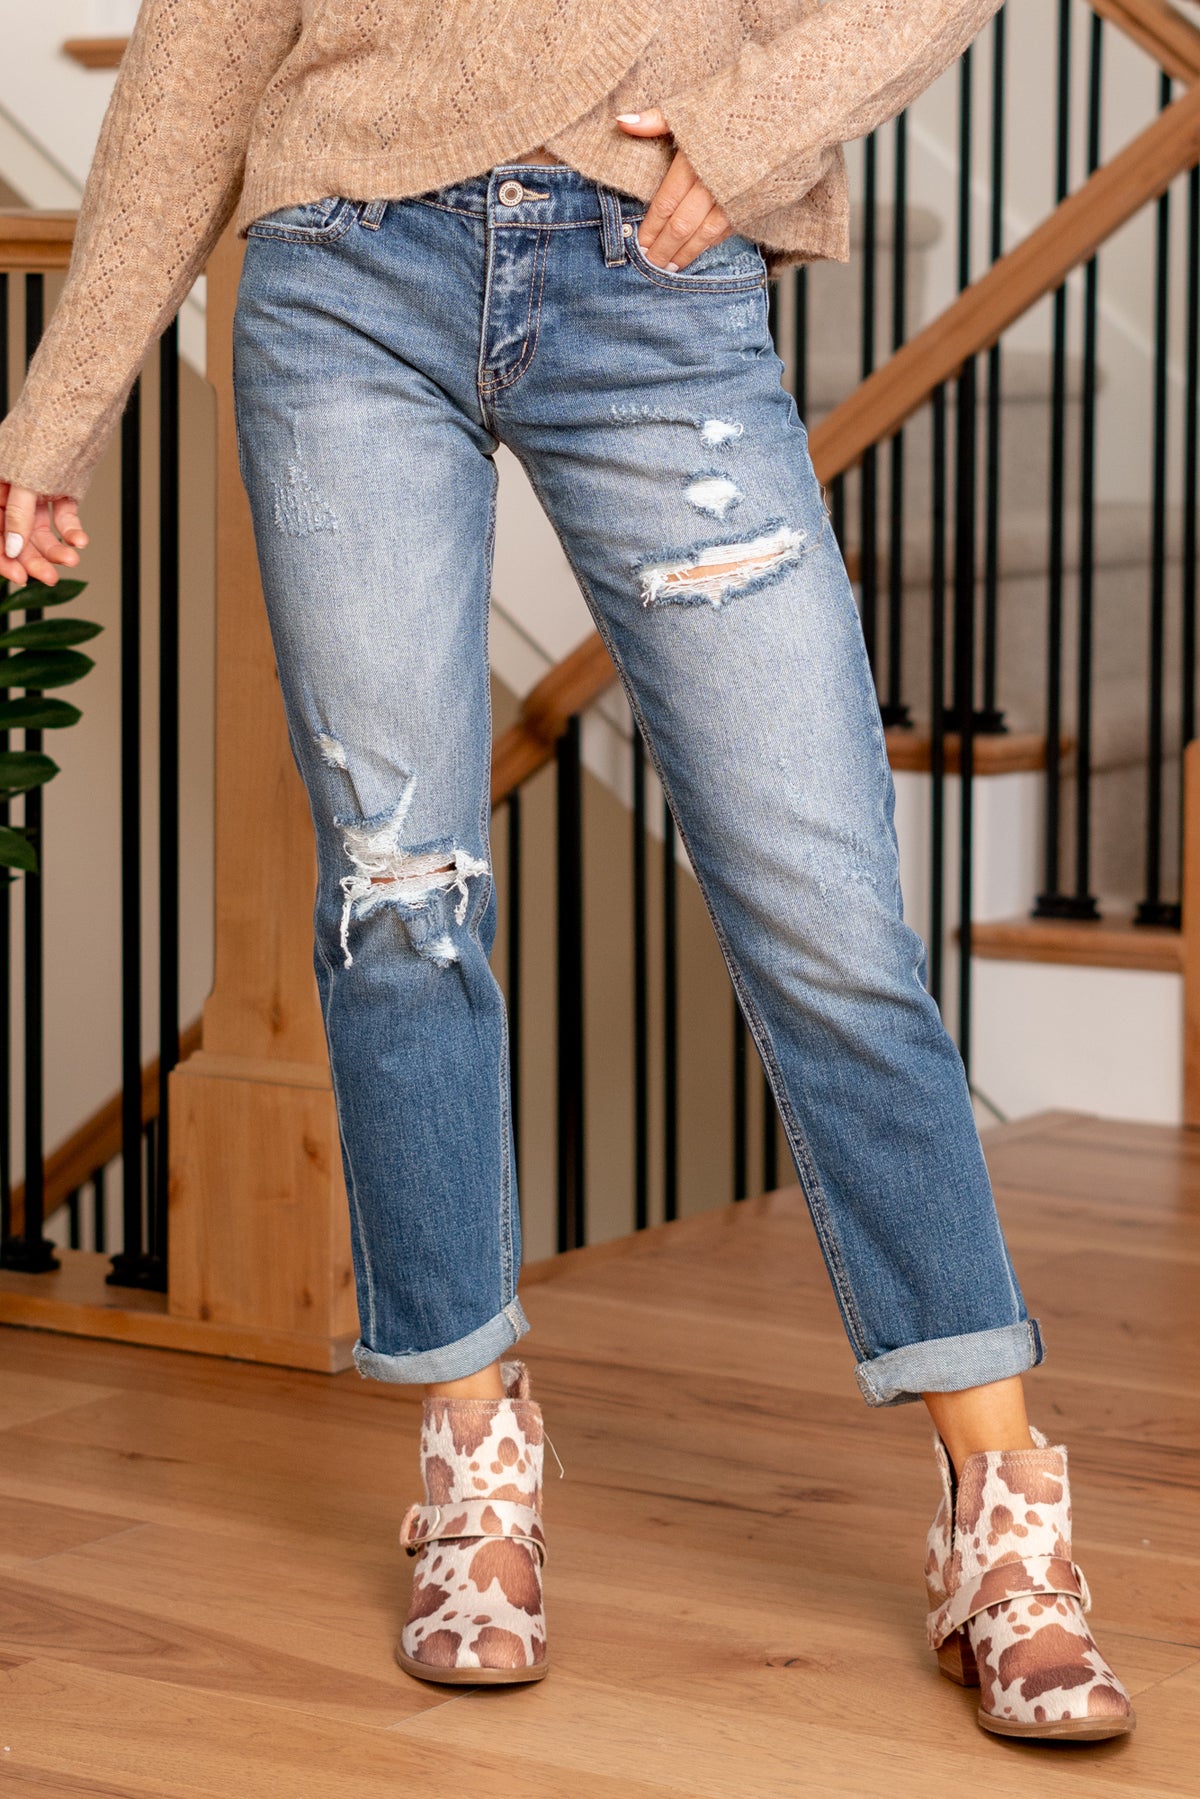 KanCan Jeans   Revamp your casual style with the Scottie Mid Rise Boyfriend Fit jeans, featuring distressed details for an effortlessly cool look. These jeans offer a comfortable mid-rise and a relaxed boyfriend fit, striking the perfect balance between laid-back and chic. The distressed details add a touch of edgy flair, making them a versatile choice for various occasions.